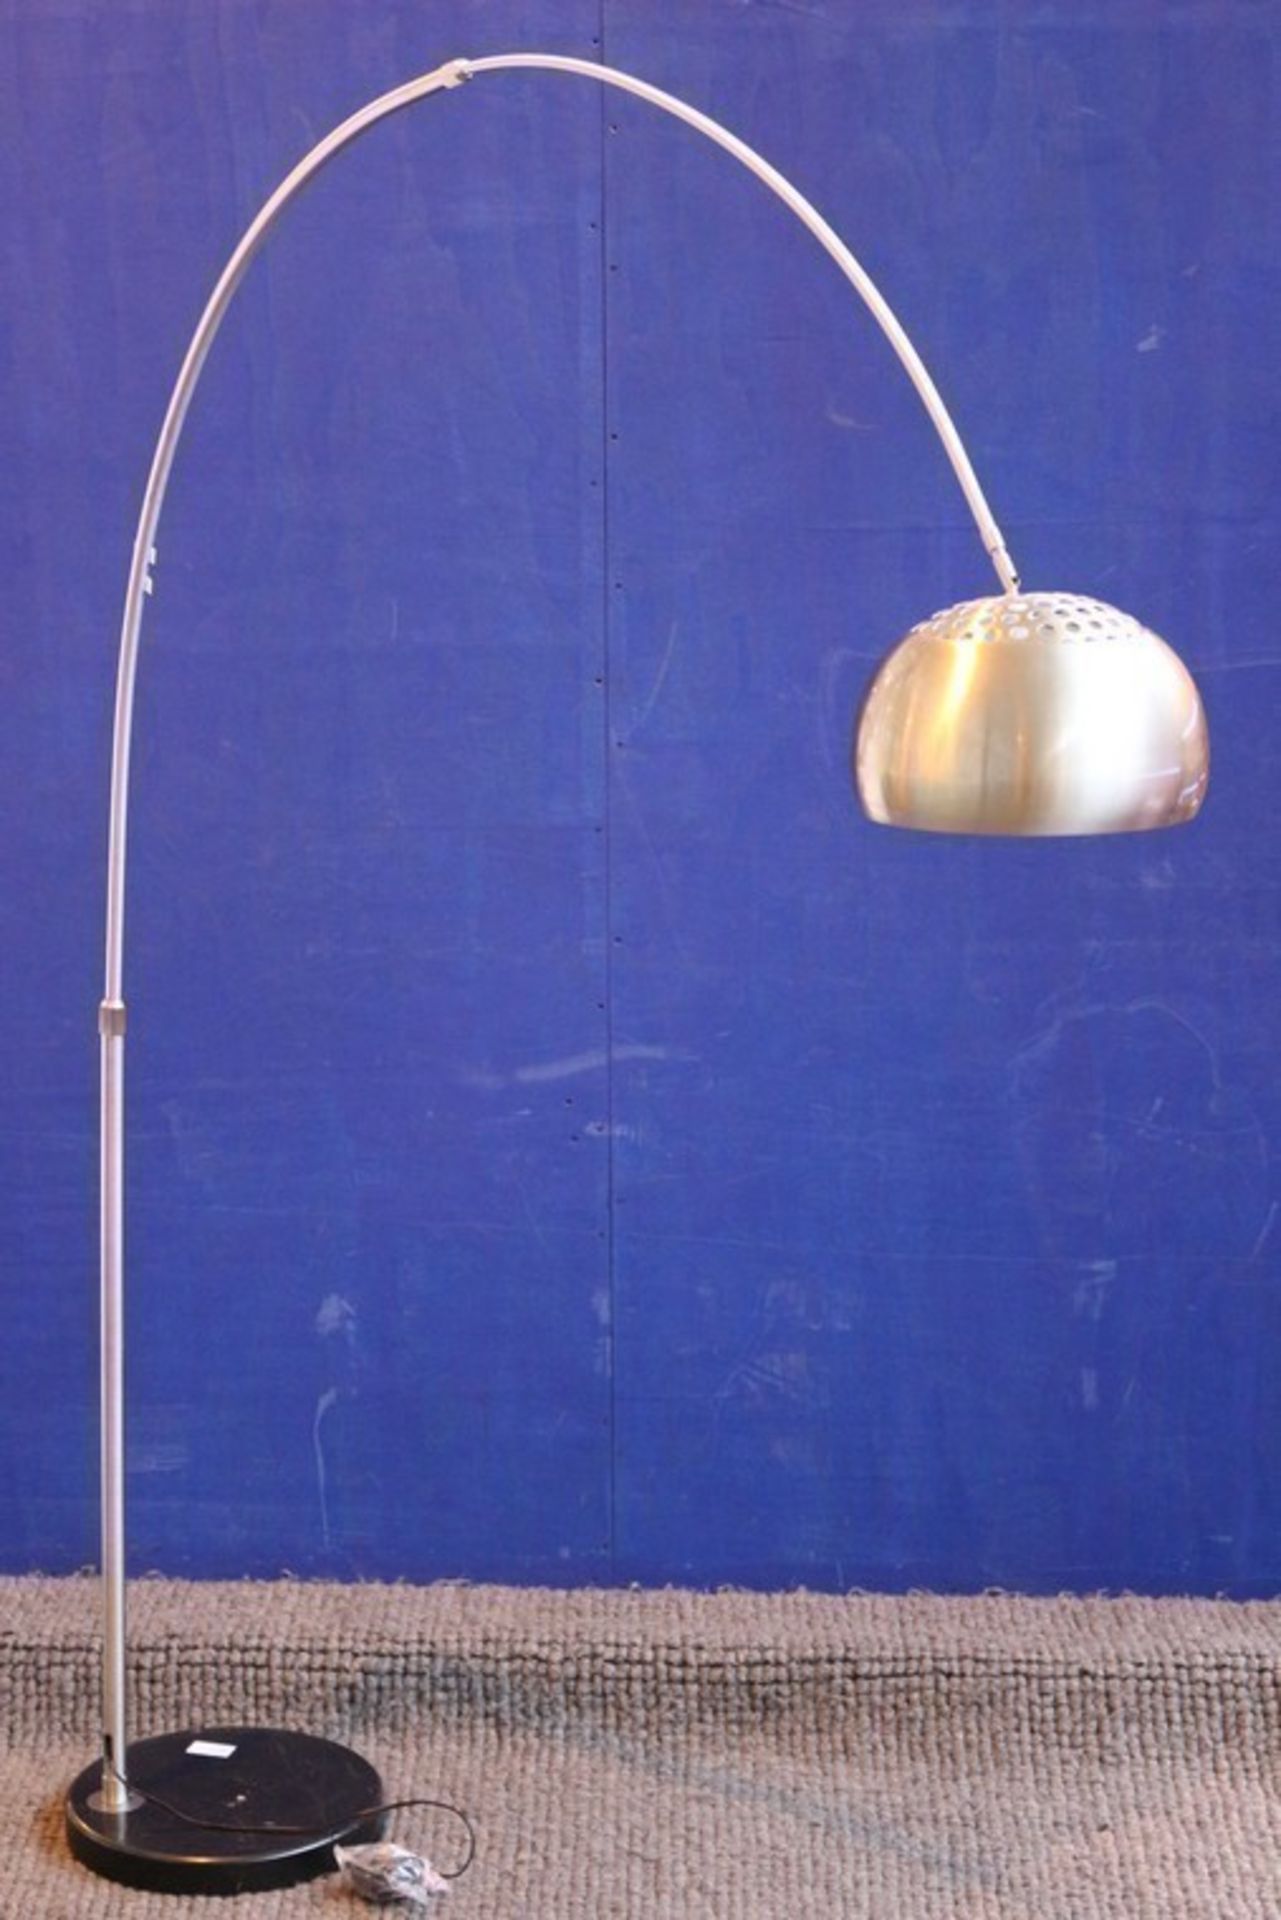 1 x EXTRA LARGE BLACK MARBLE BASE STAINLESS STEEL ARCHED FLOOR LAMP (0335XL) *PLEASE NOTE THAT THE